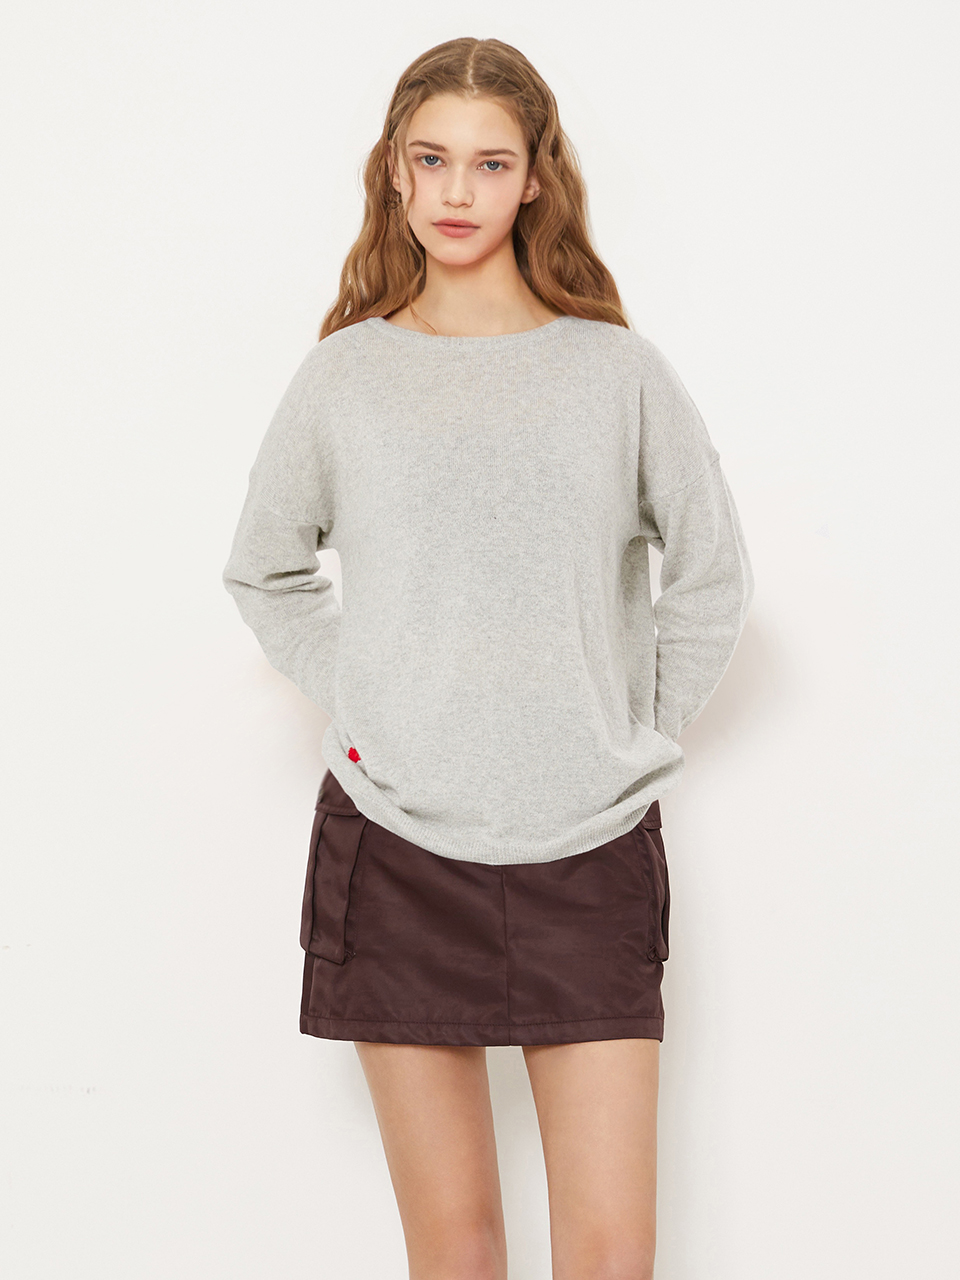 Cashmere Wool Blend Knit Top